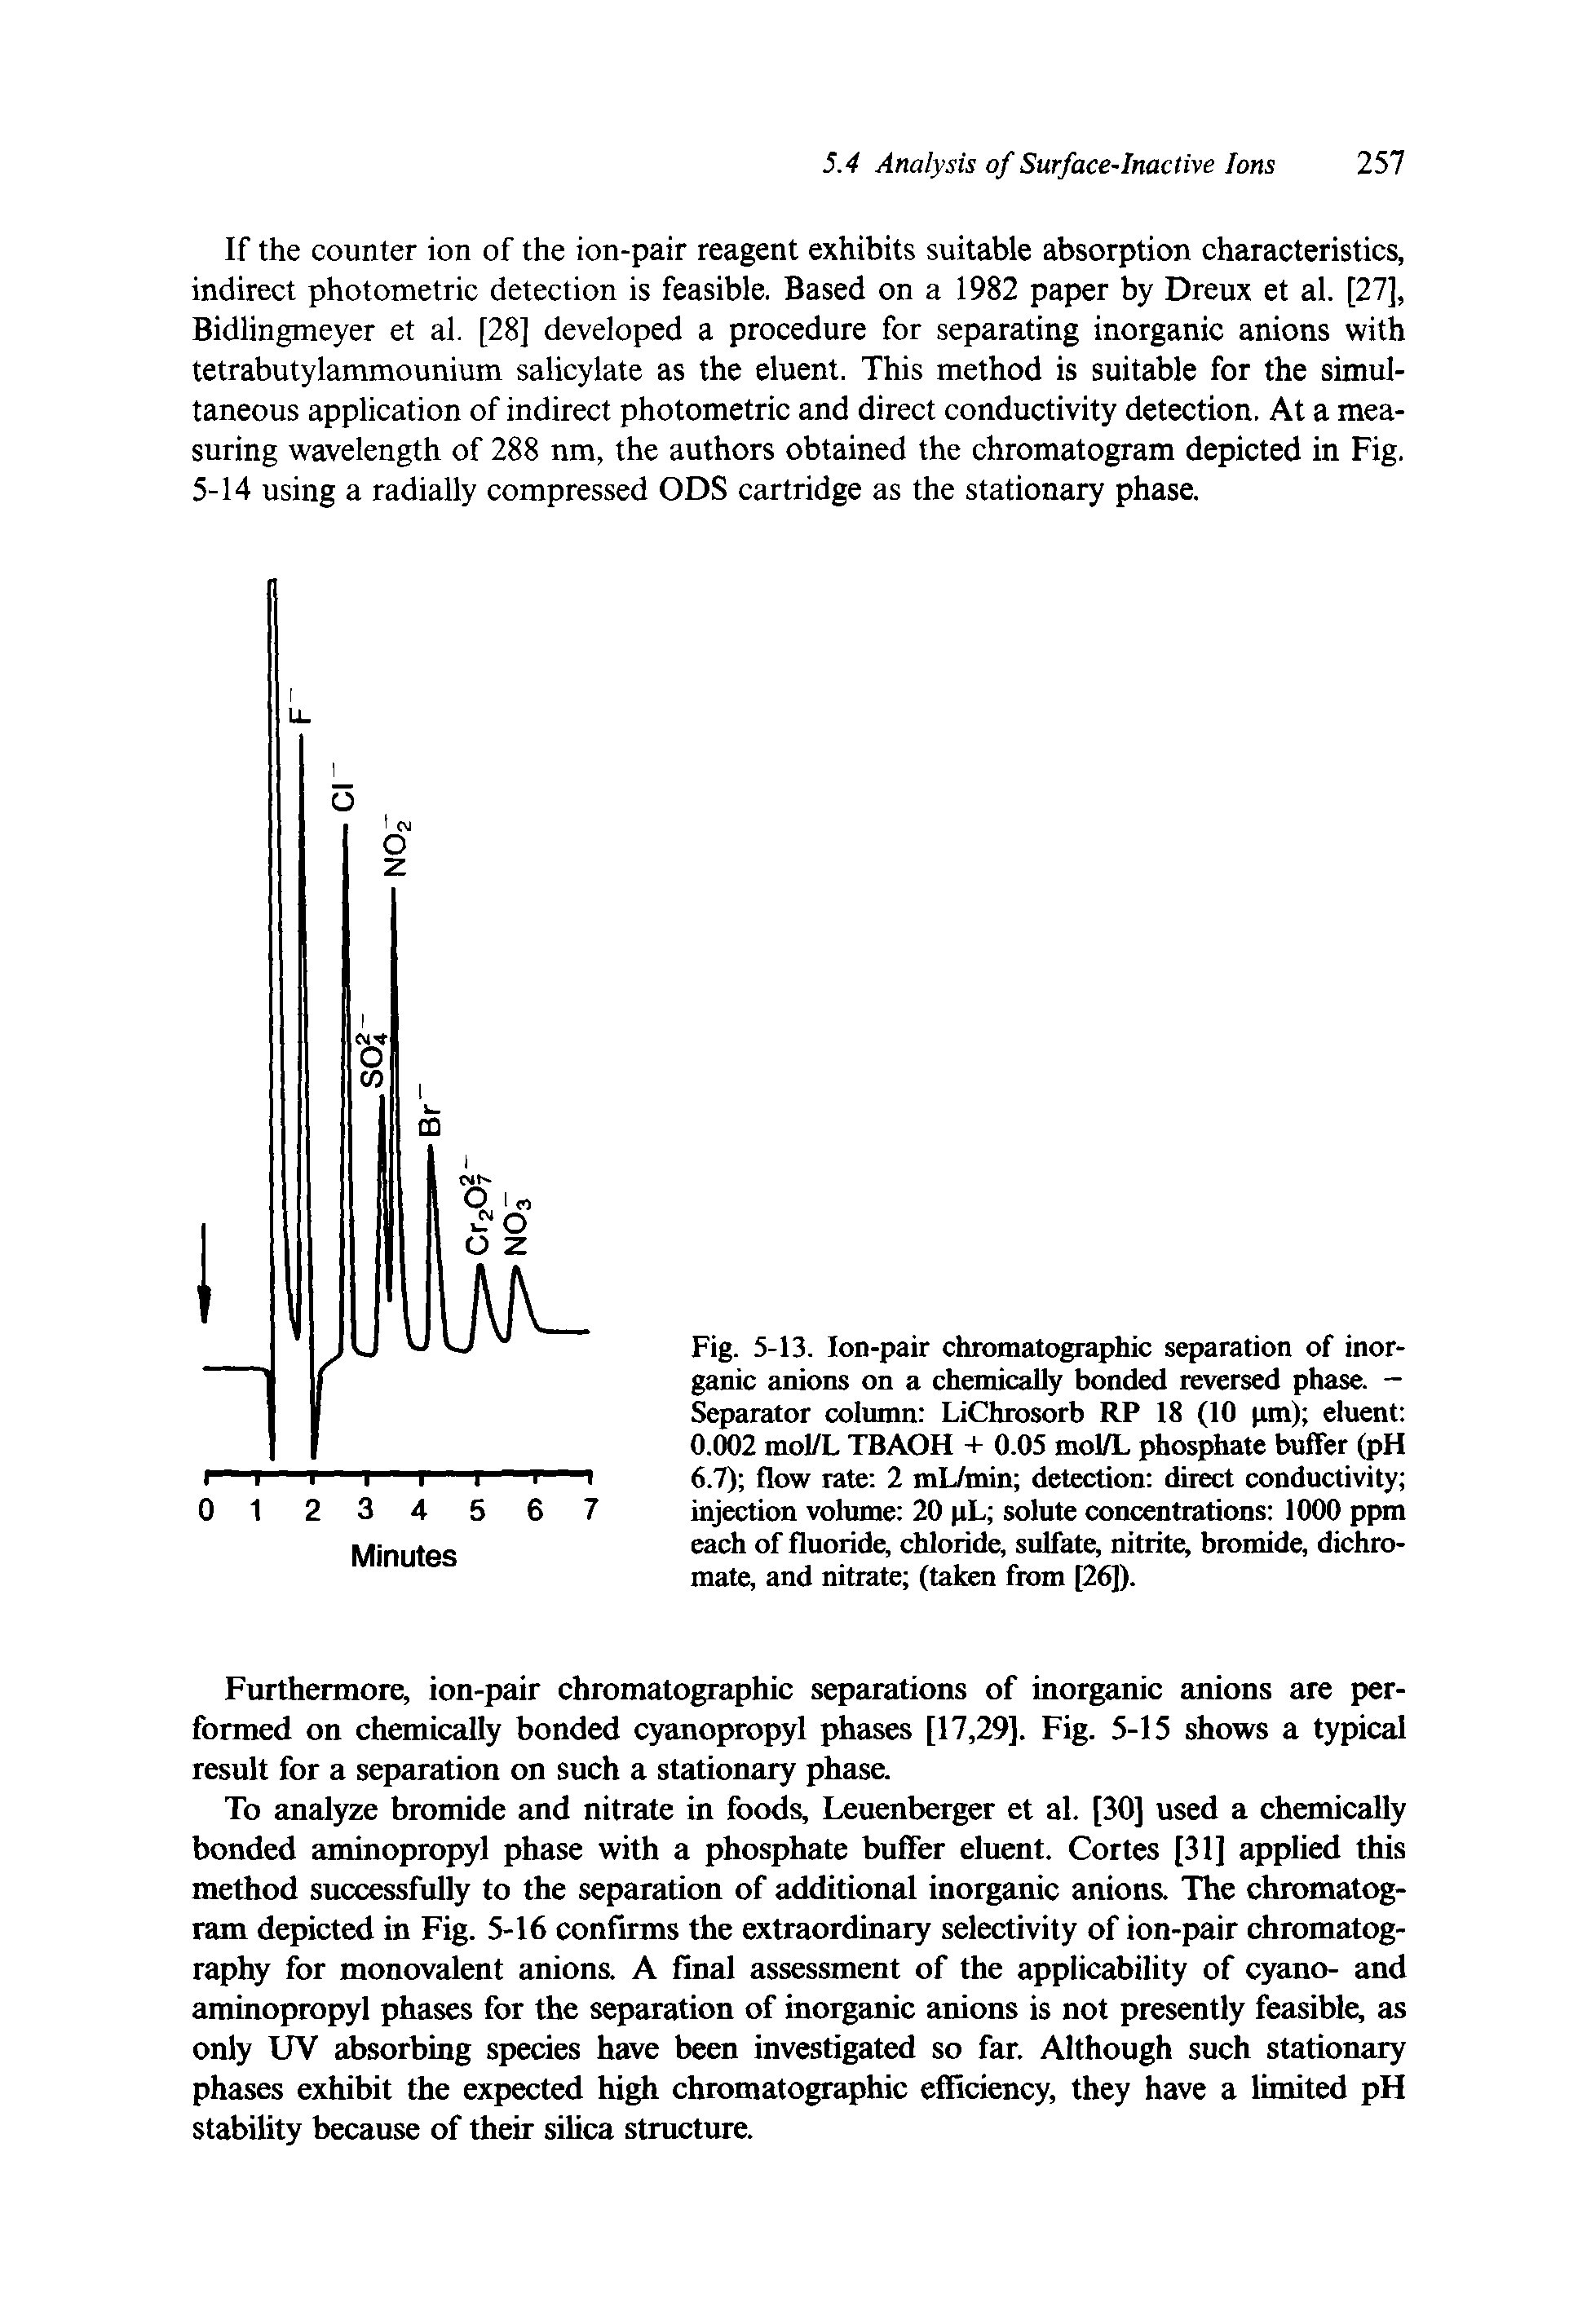 Fig. 5-13. Ion-pair chromatographic separation of inorganic anions on a chemically bonded reversed phase. — Separator column LiChrosorb RP 18 (10 xm) eluent 0.002 mol/L TBAOH + 0.05 mol/L phosphate buffer (pH 6.7) flow rate 2 mL/min detection direct conductivity injection volume 20 pL solute concentrations 1000 ppm each of fluoride, chloride, sulfate, nitrite, bromide, dichromate, and nitrate (taken from [26]).